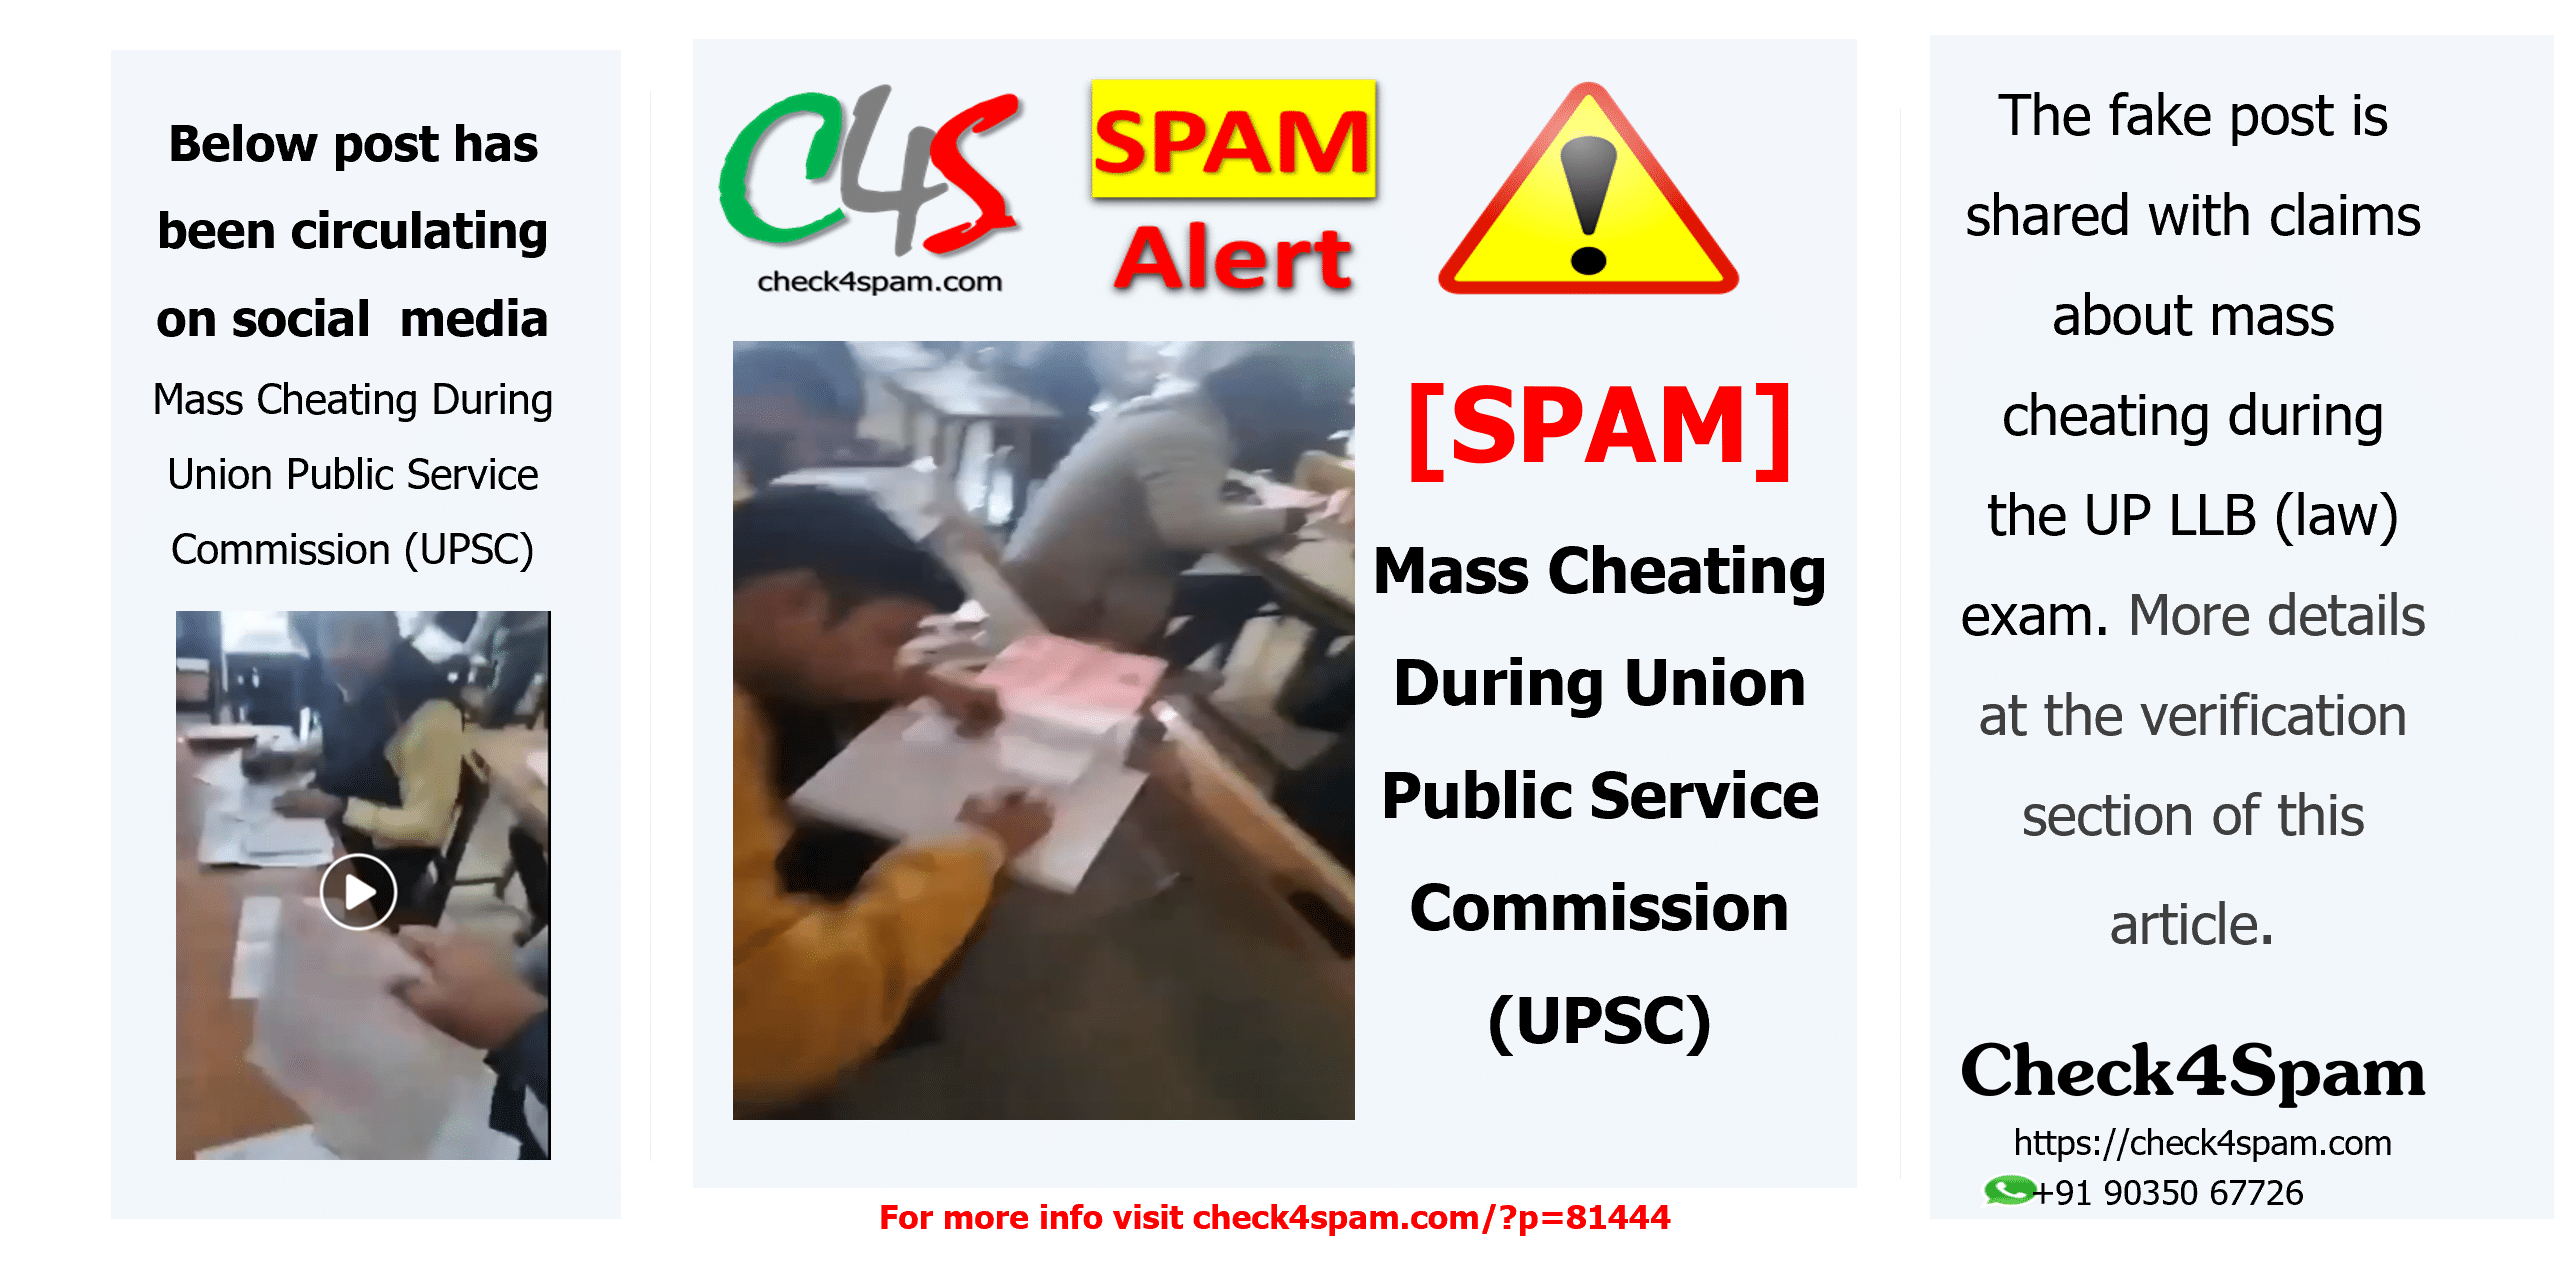 Mass Cheating During Union Public Service Commission (UPSC)